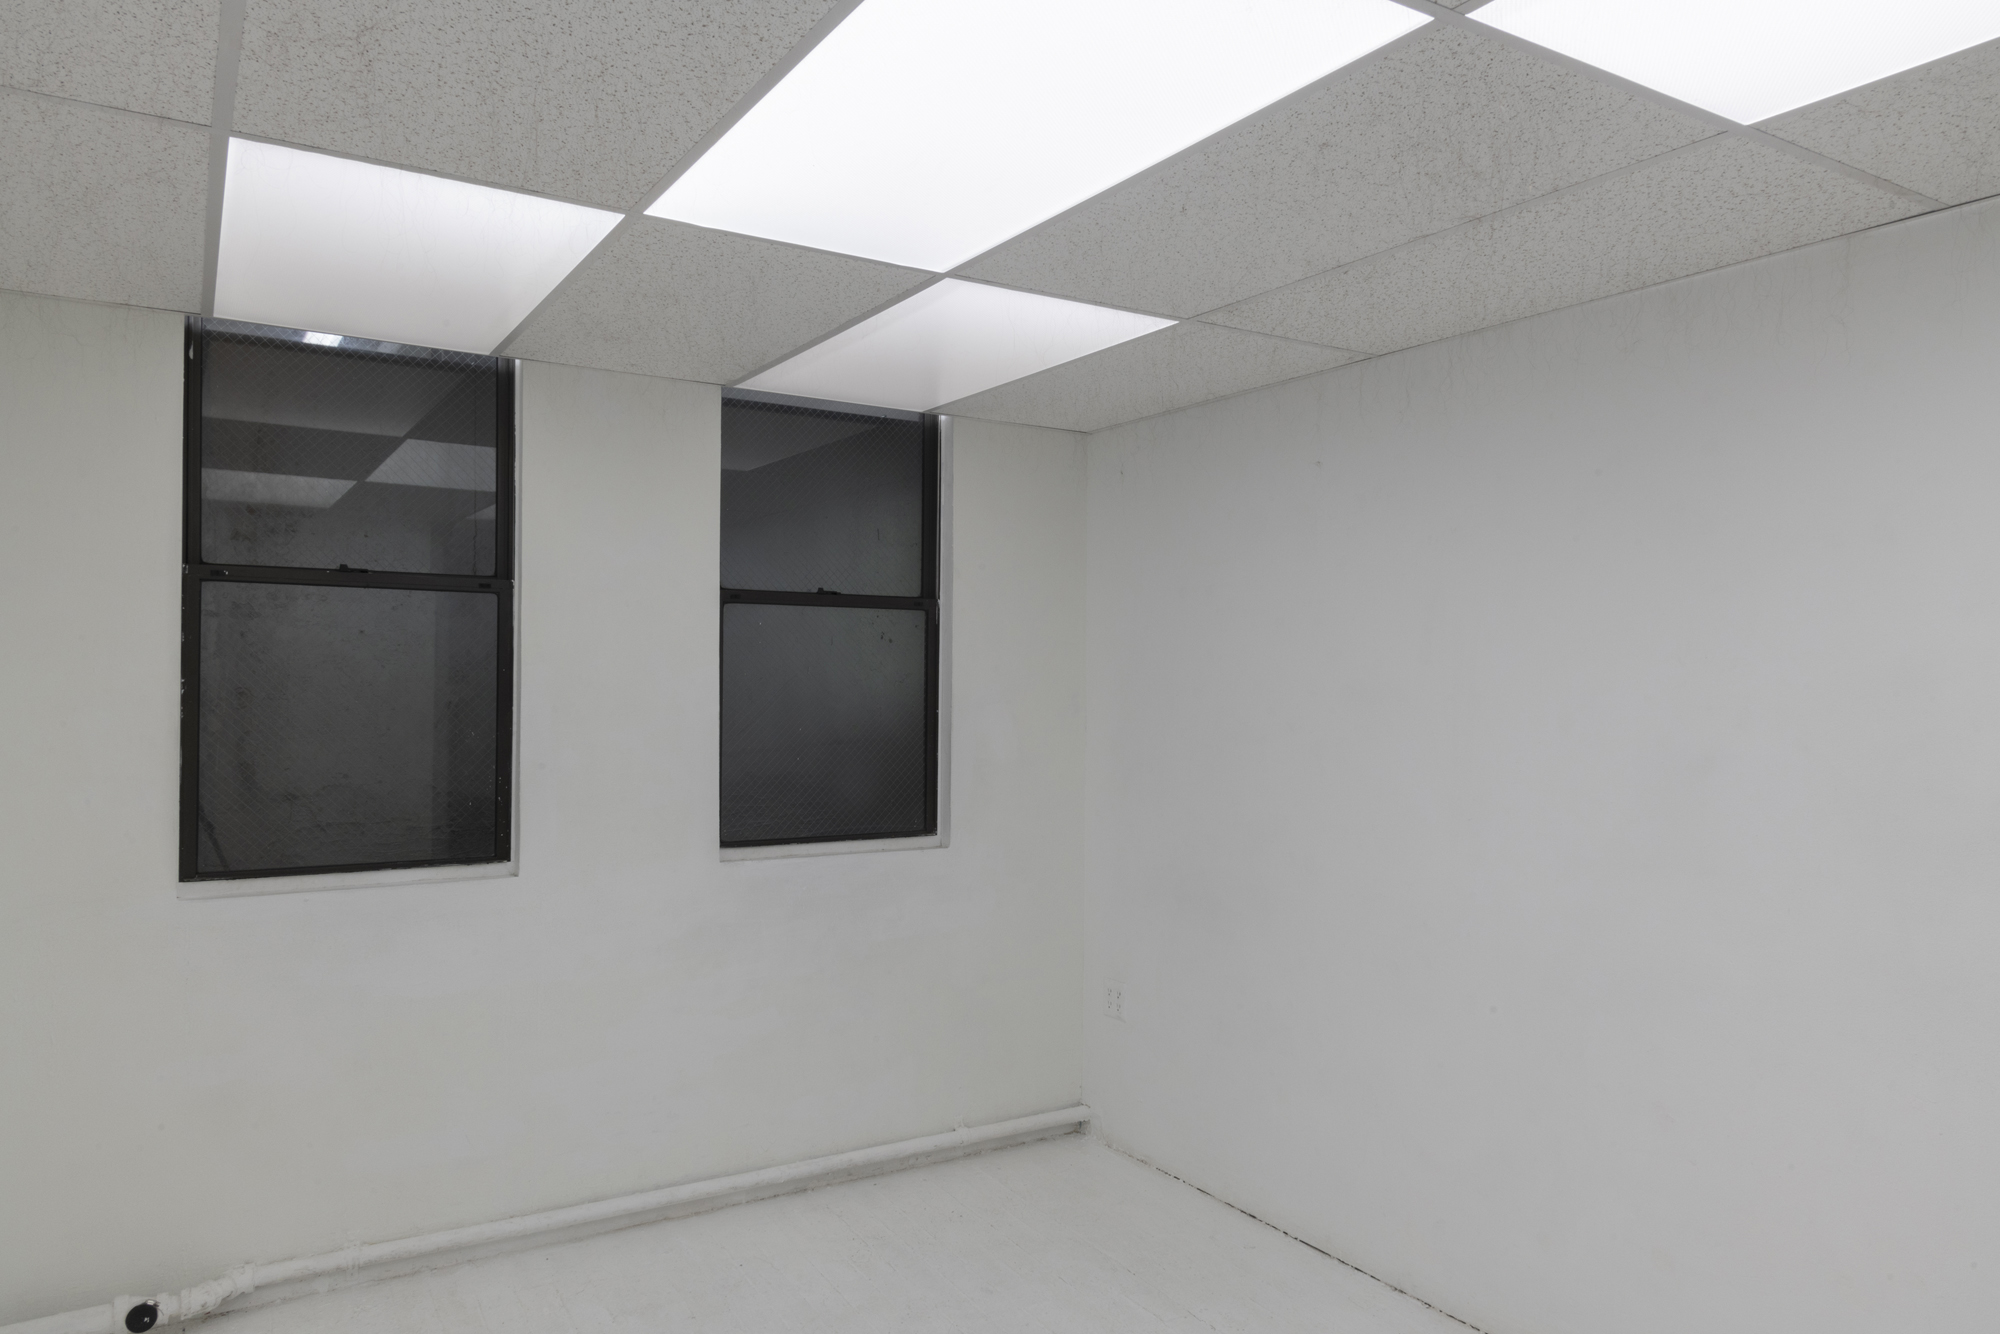   Anagen , 2018–19. Armstrong ceiling tiles in dropped ceiling in gallery, human hair, glue. 86 x 117 x 203 inches (approximately). 